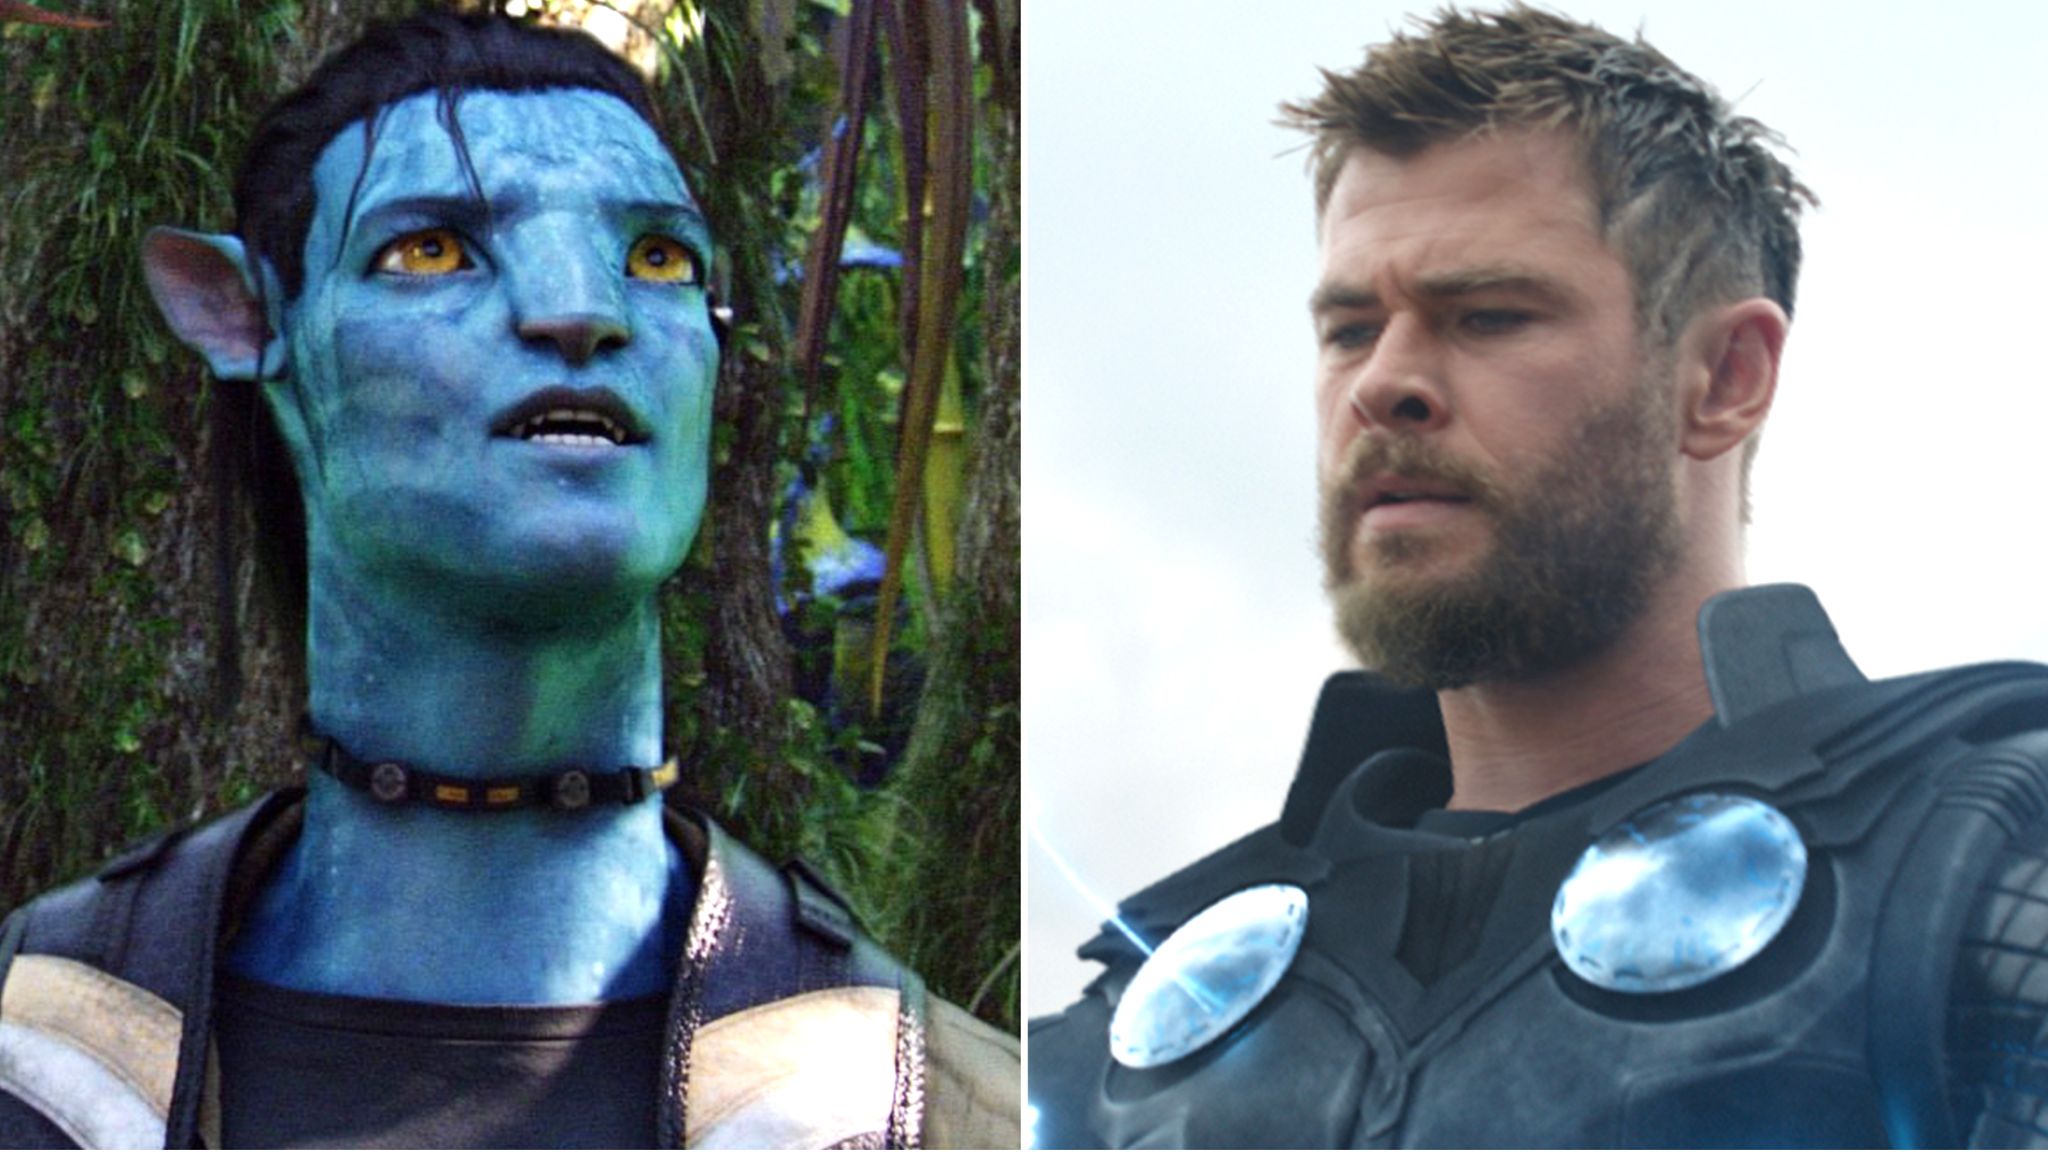 Avengers: Endgame overtakes Avatar as the most successful movie at